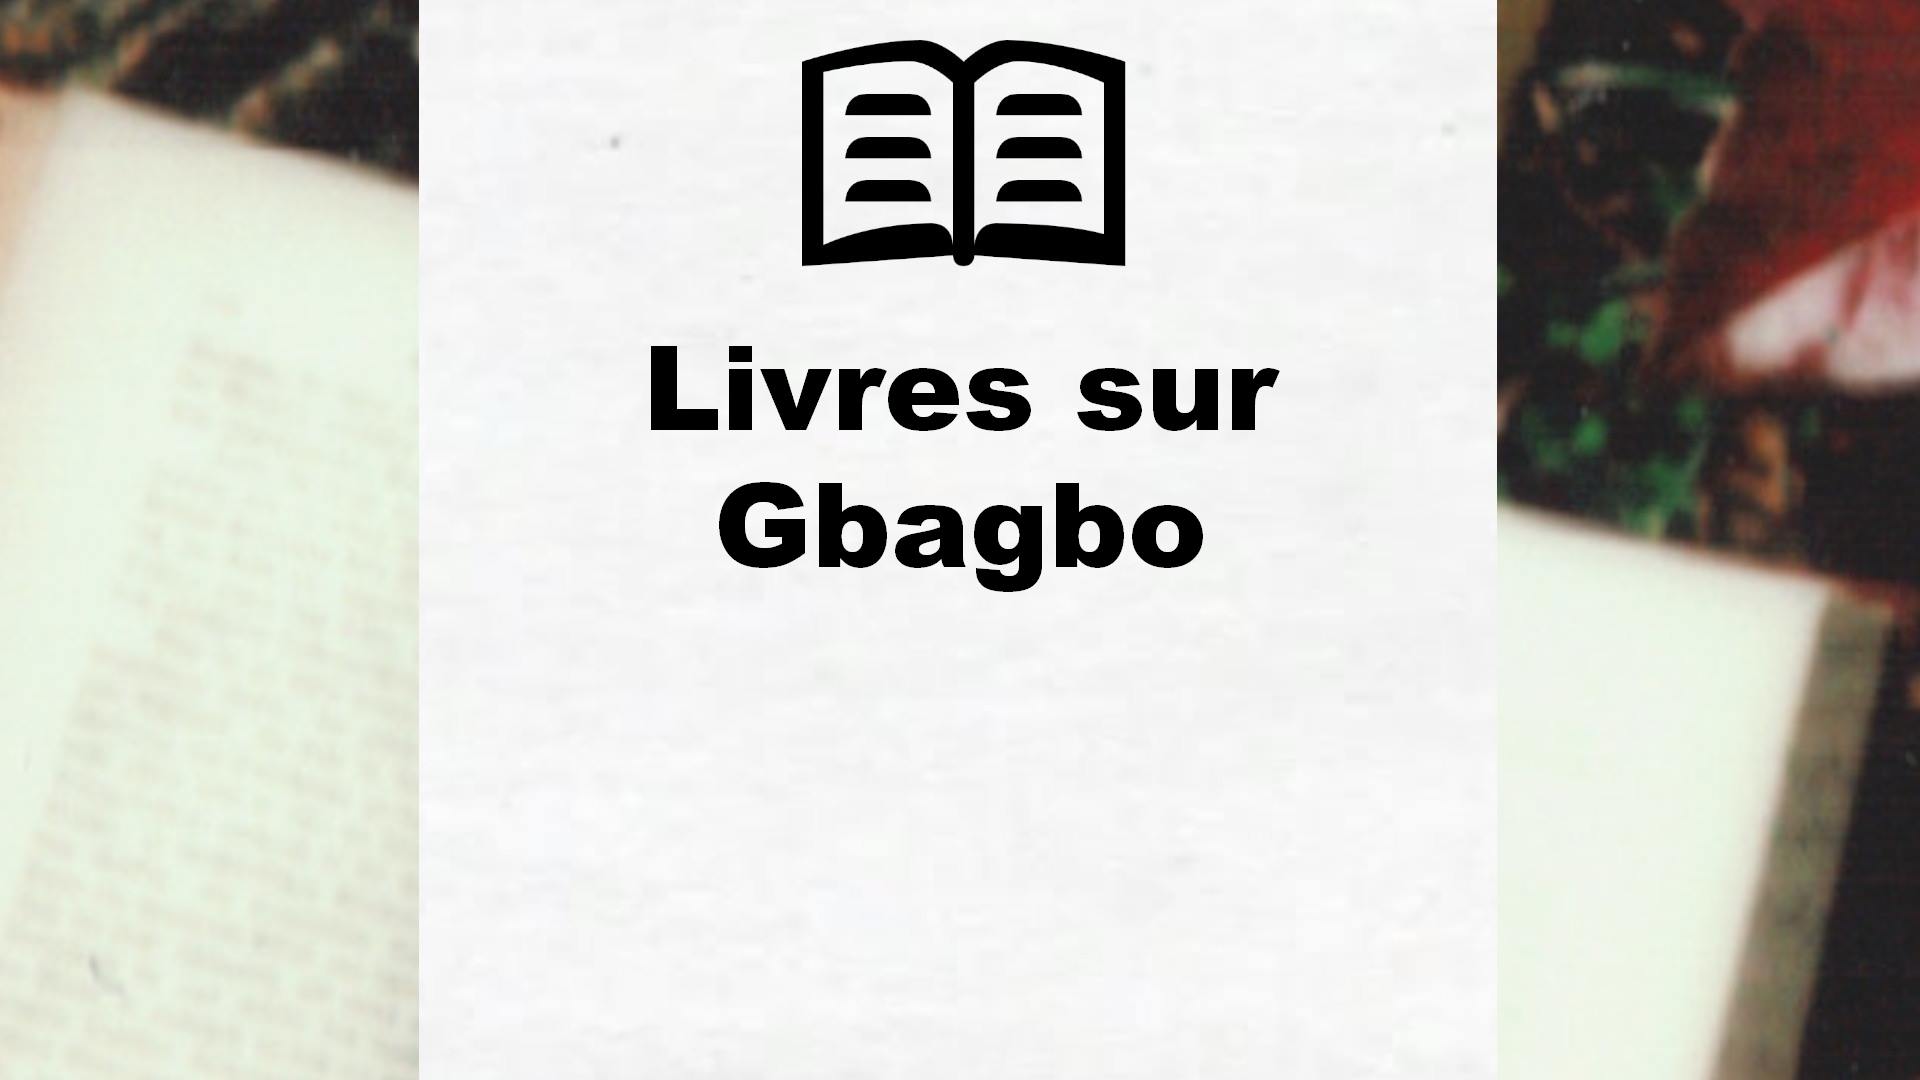 Livres sur Gbagbo